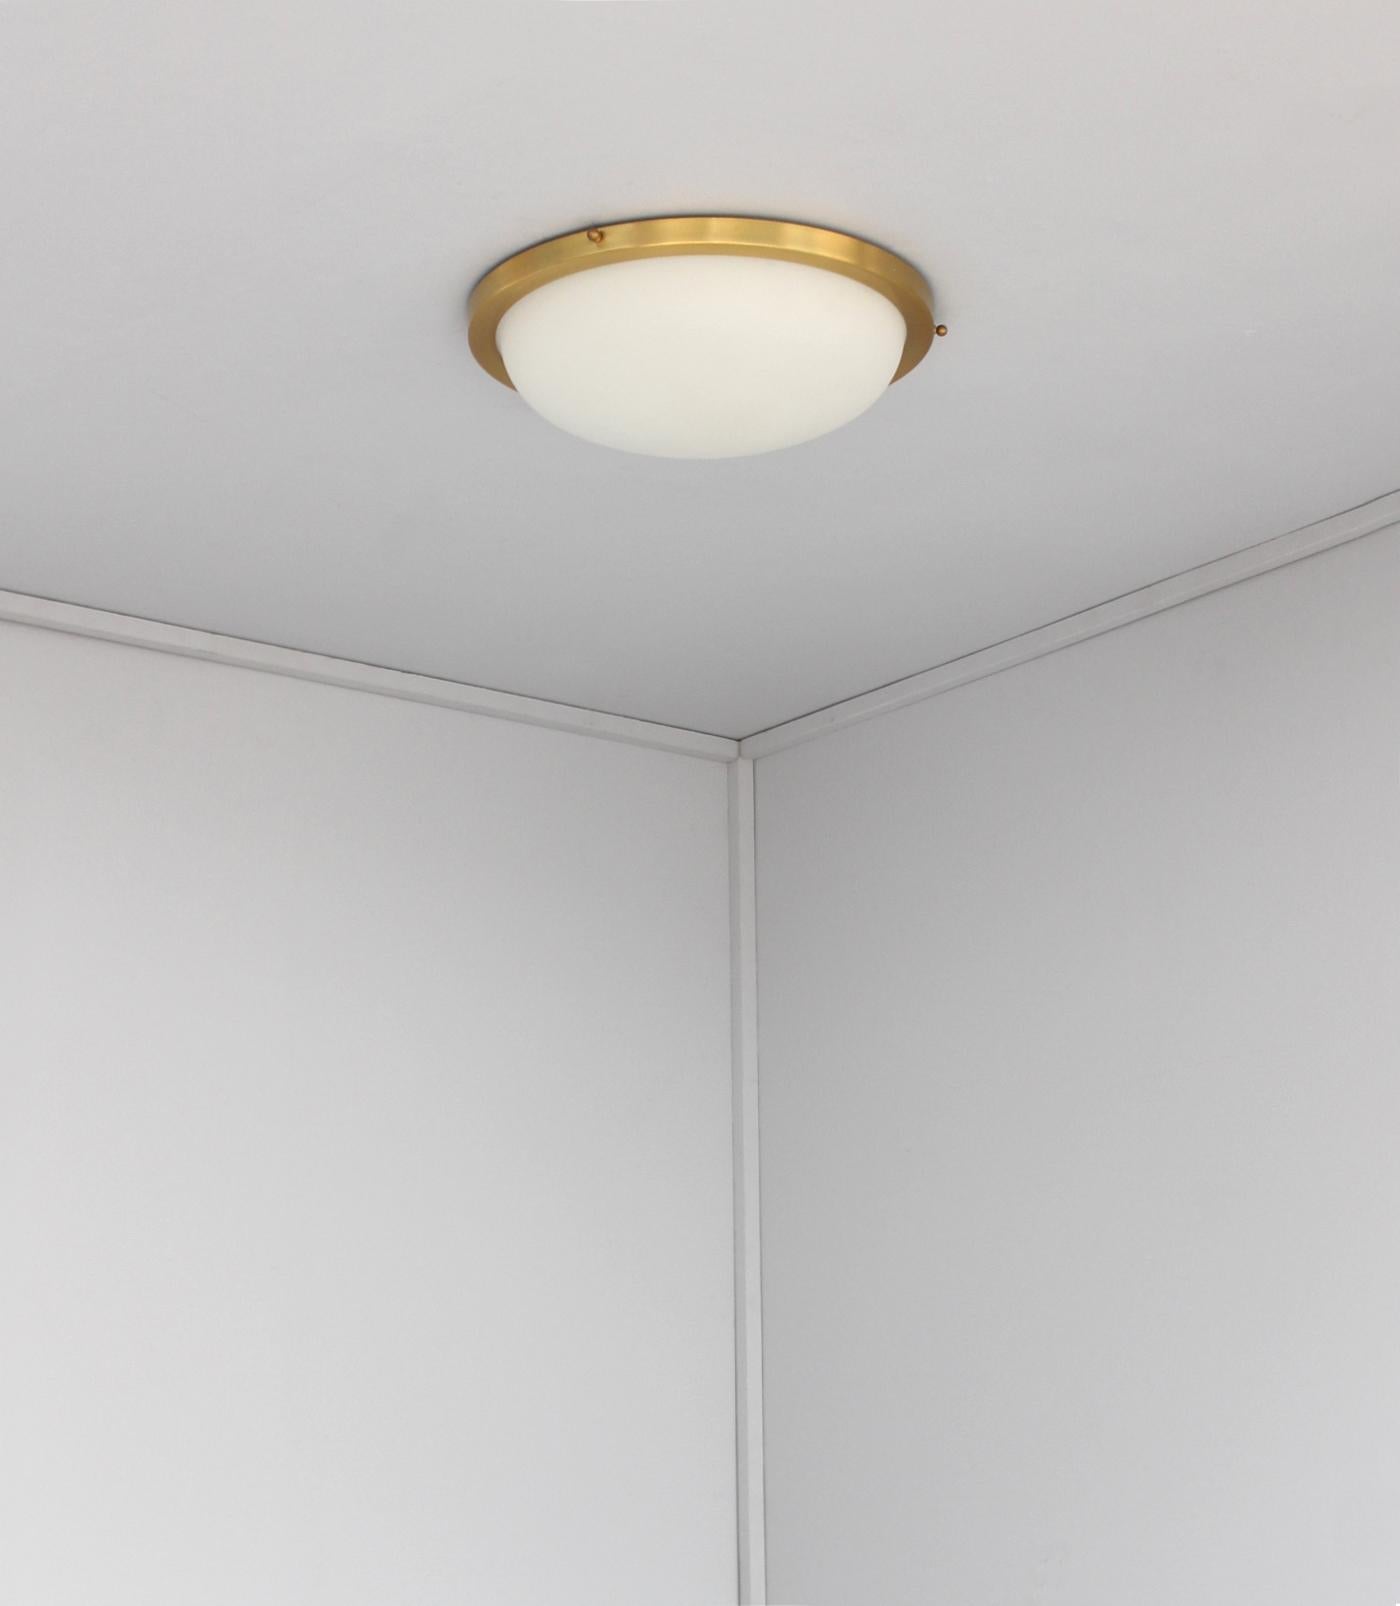 Jean Perzel - A fine midcentury ceiling light made with a circular brass structure that holds a fluted white opaline frosted glass bowl diffuser.
Signed.